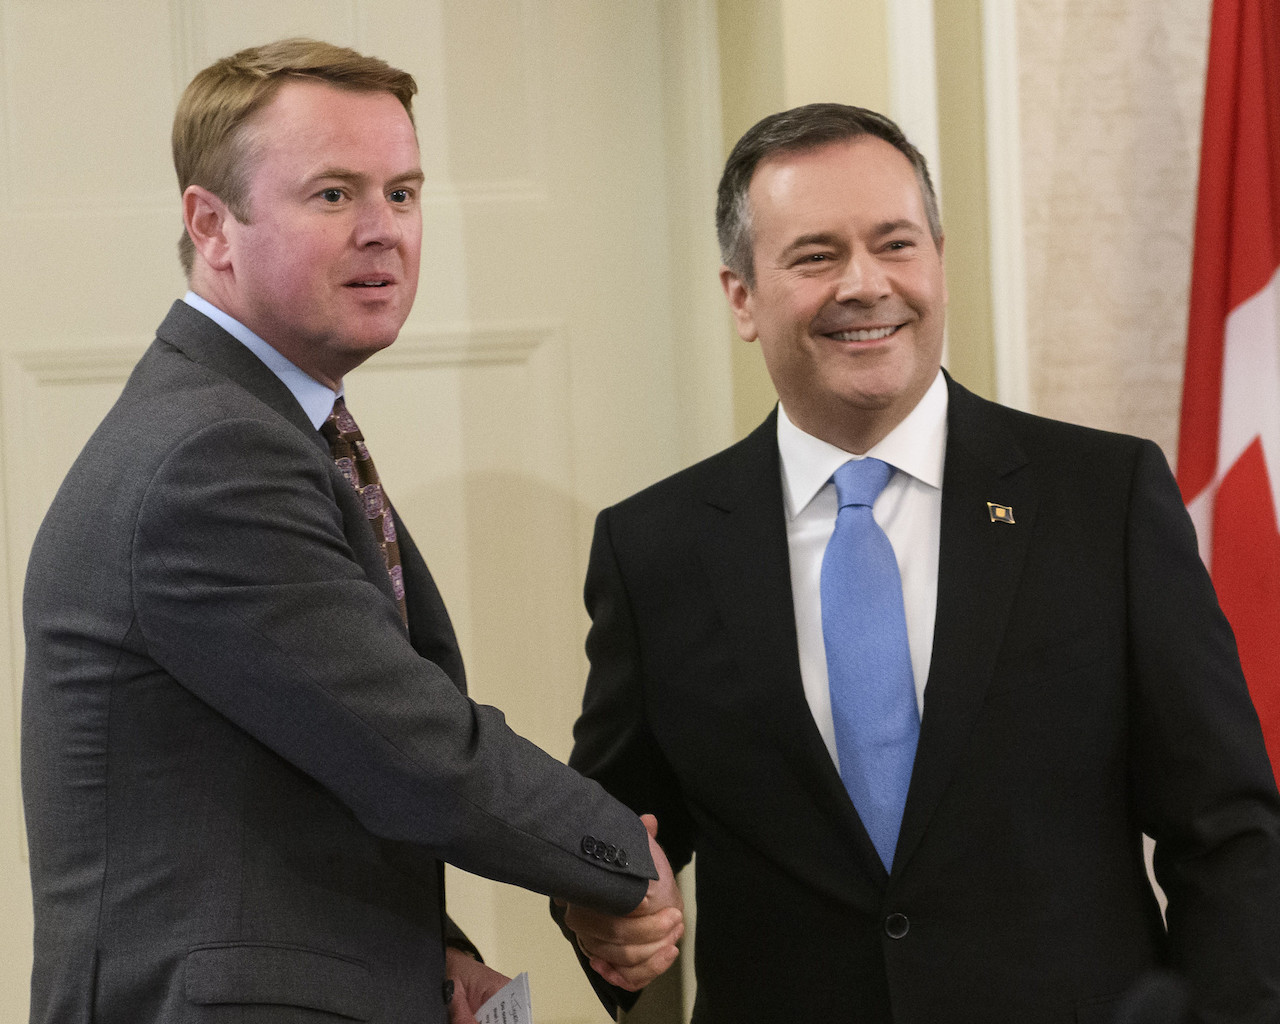 Alberta Health Minister Tyler Shandro with Premier Jason Kenney at cabinet swearing-In ceremony. Photo: Premier of Alberta/Flickr